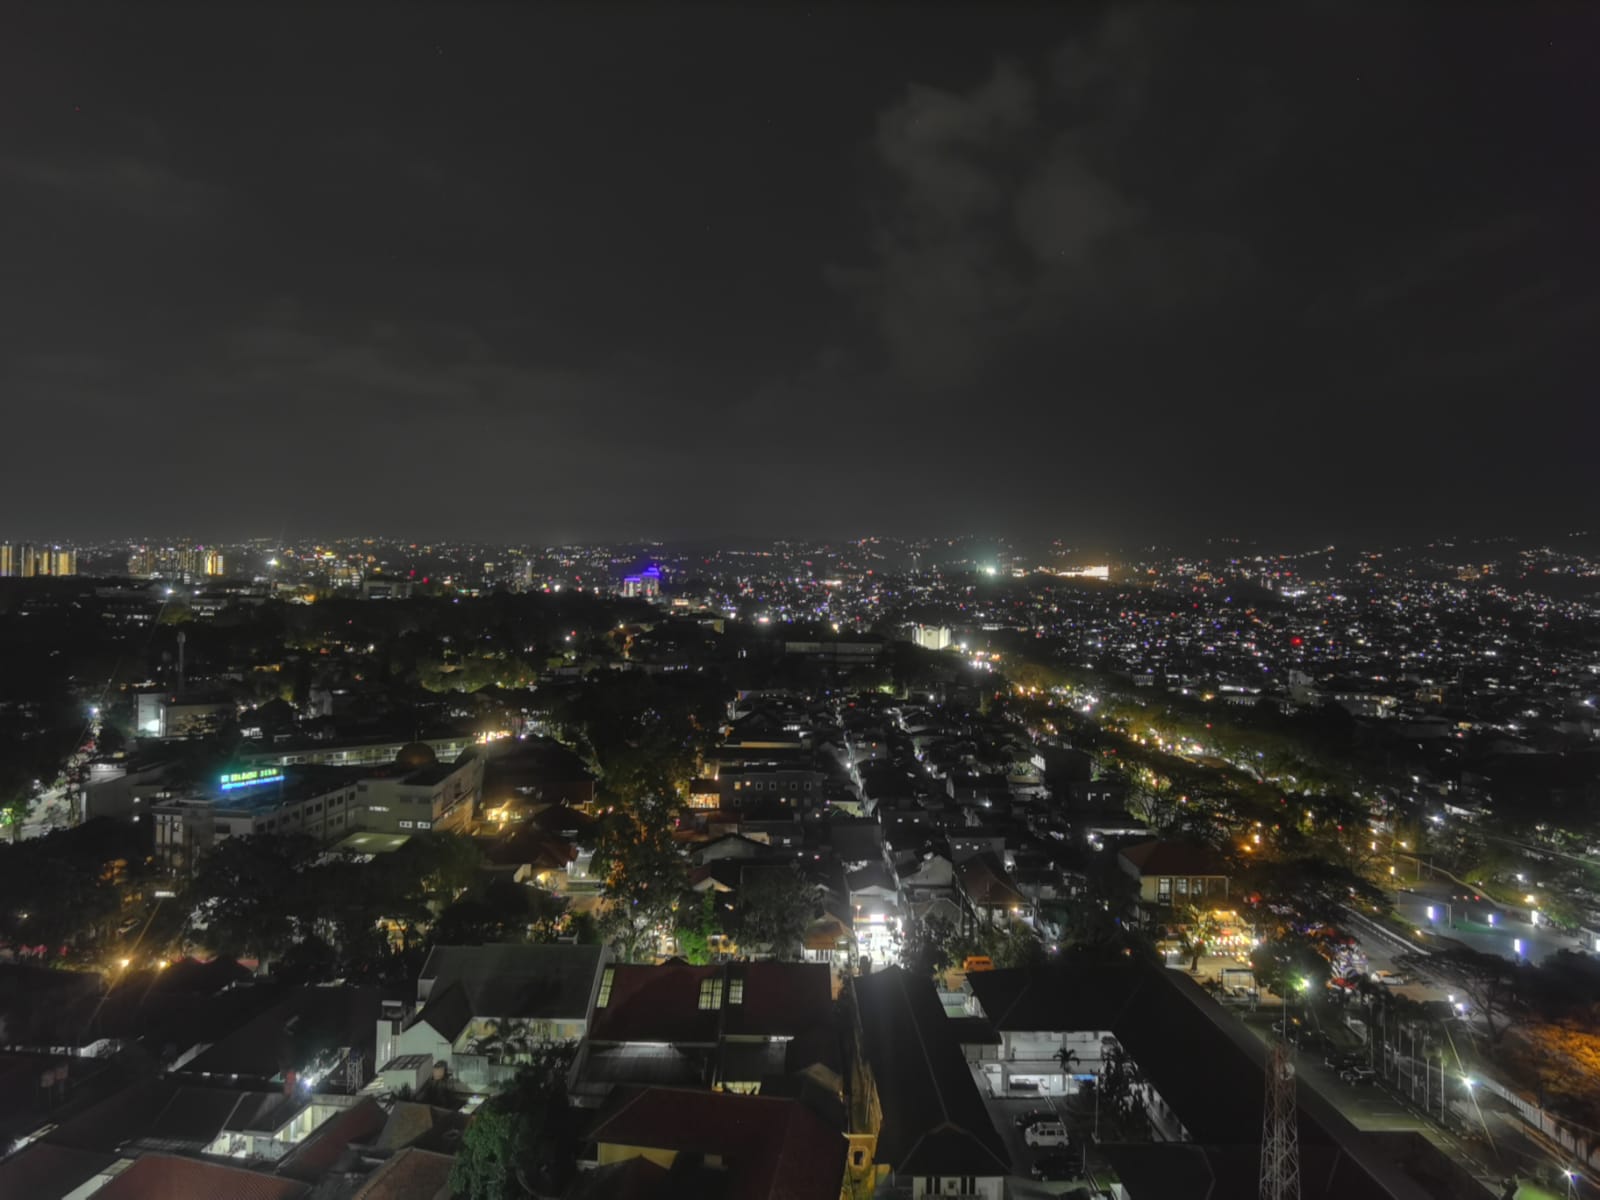 The view of Bandung, Indonesia